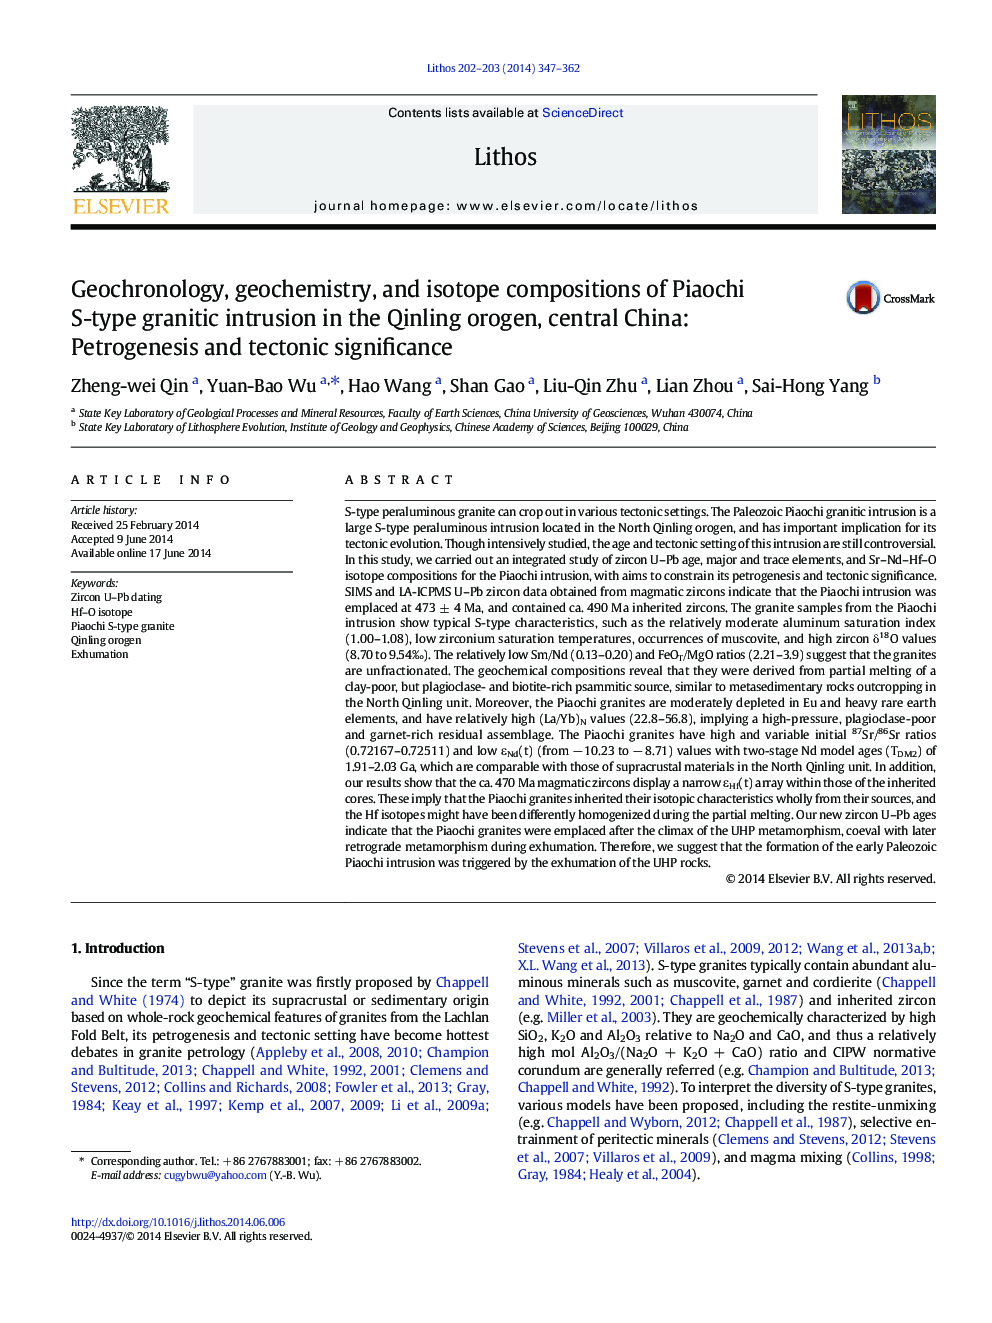 Geochronology, geochemistry, and isotope compositions of Piaochi S-type granitic intrusion in the Qinling orogen, central China: Petrogenesis and tectonic significance